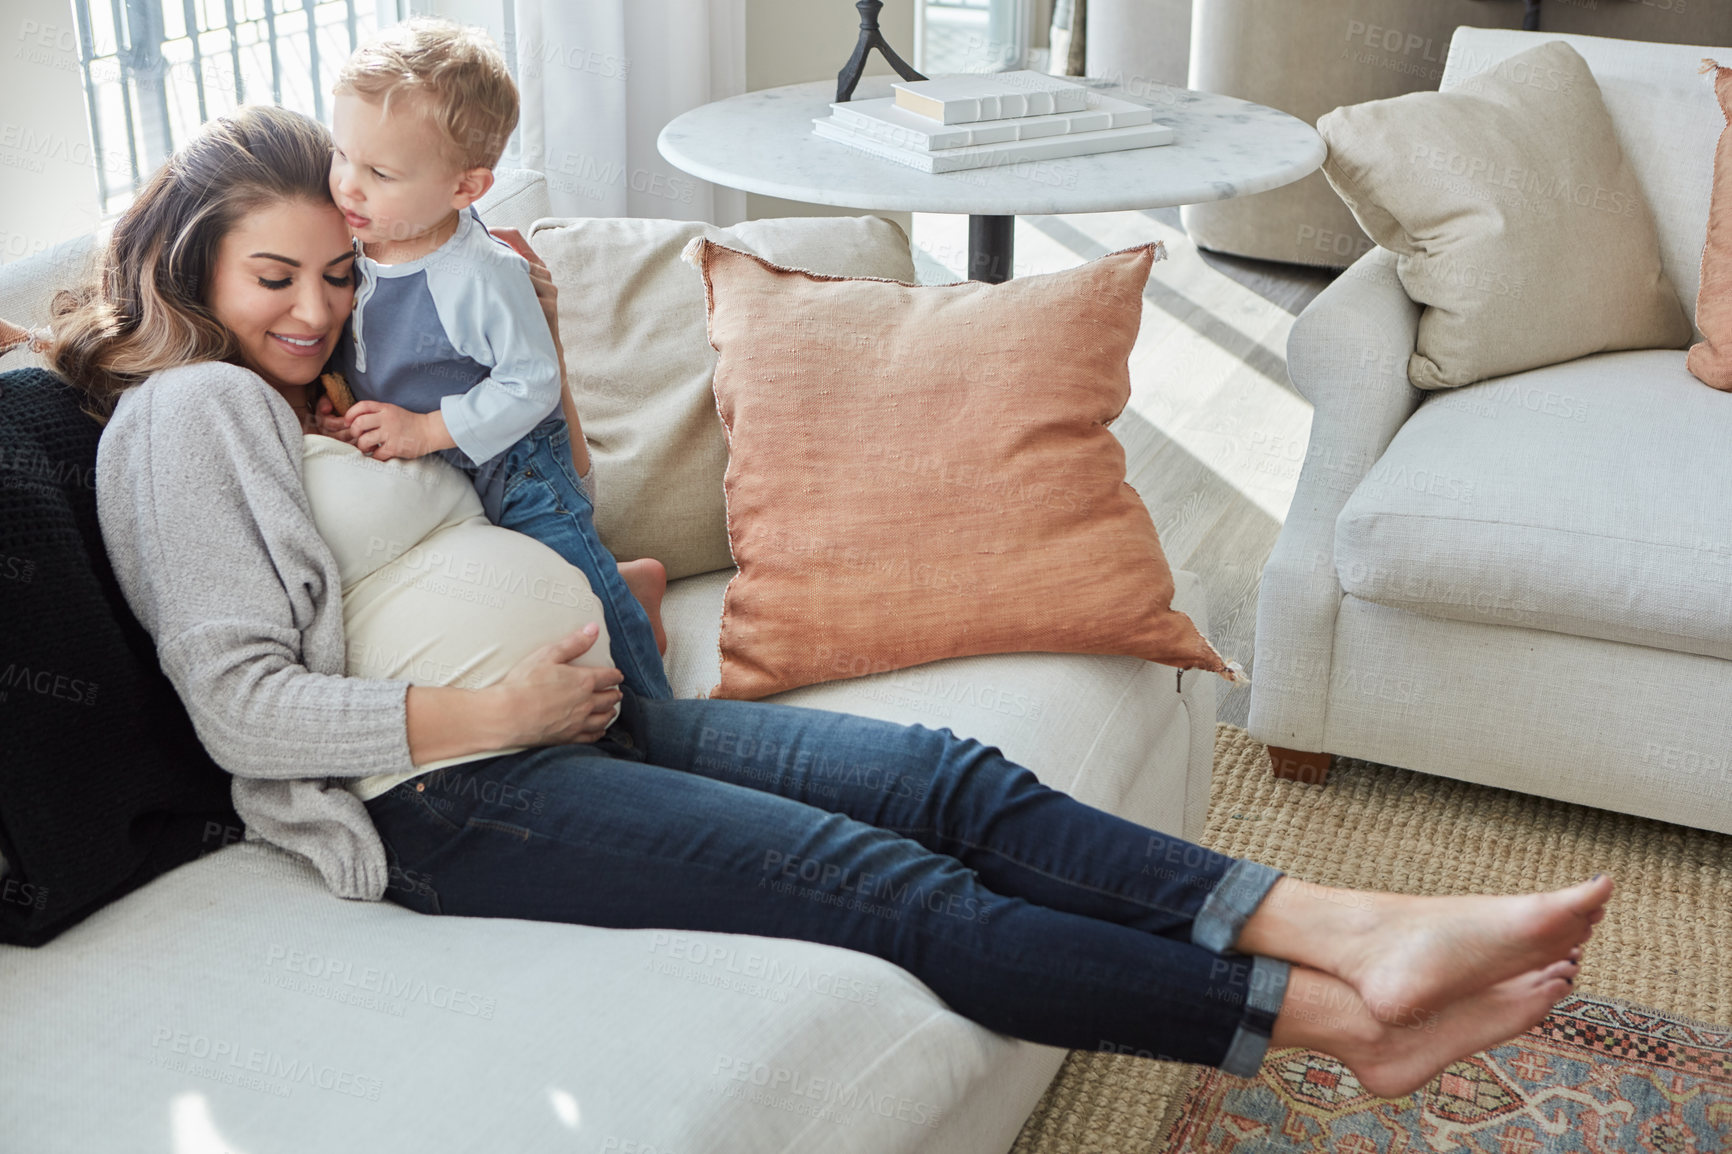 Buy stock photo Shot of a pregnant woman bonding with her toddler son at home